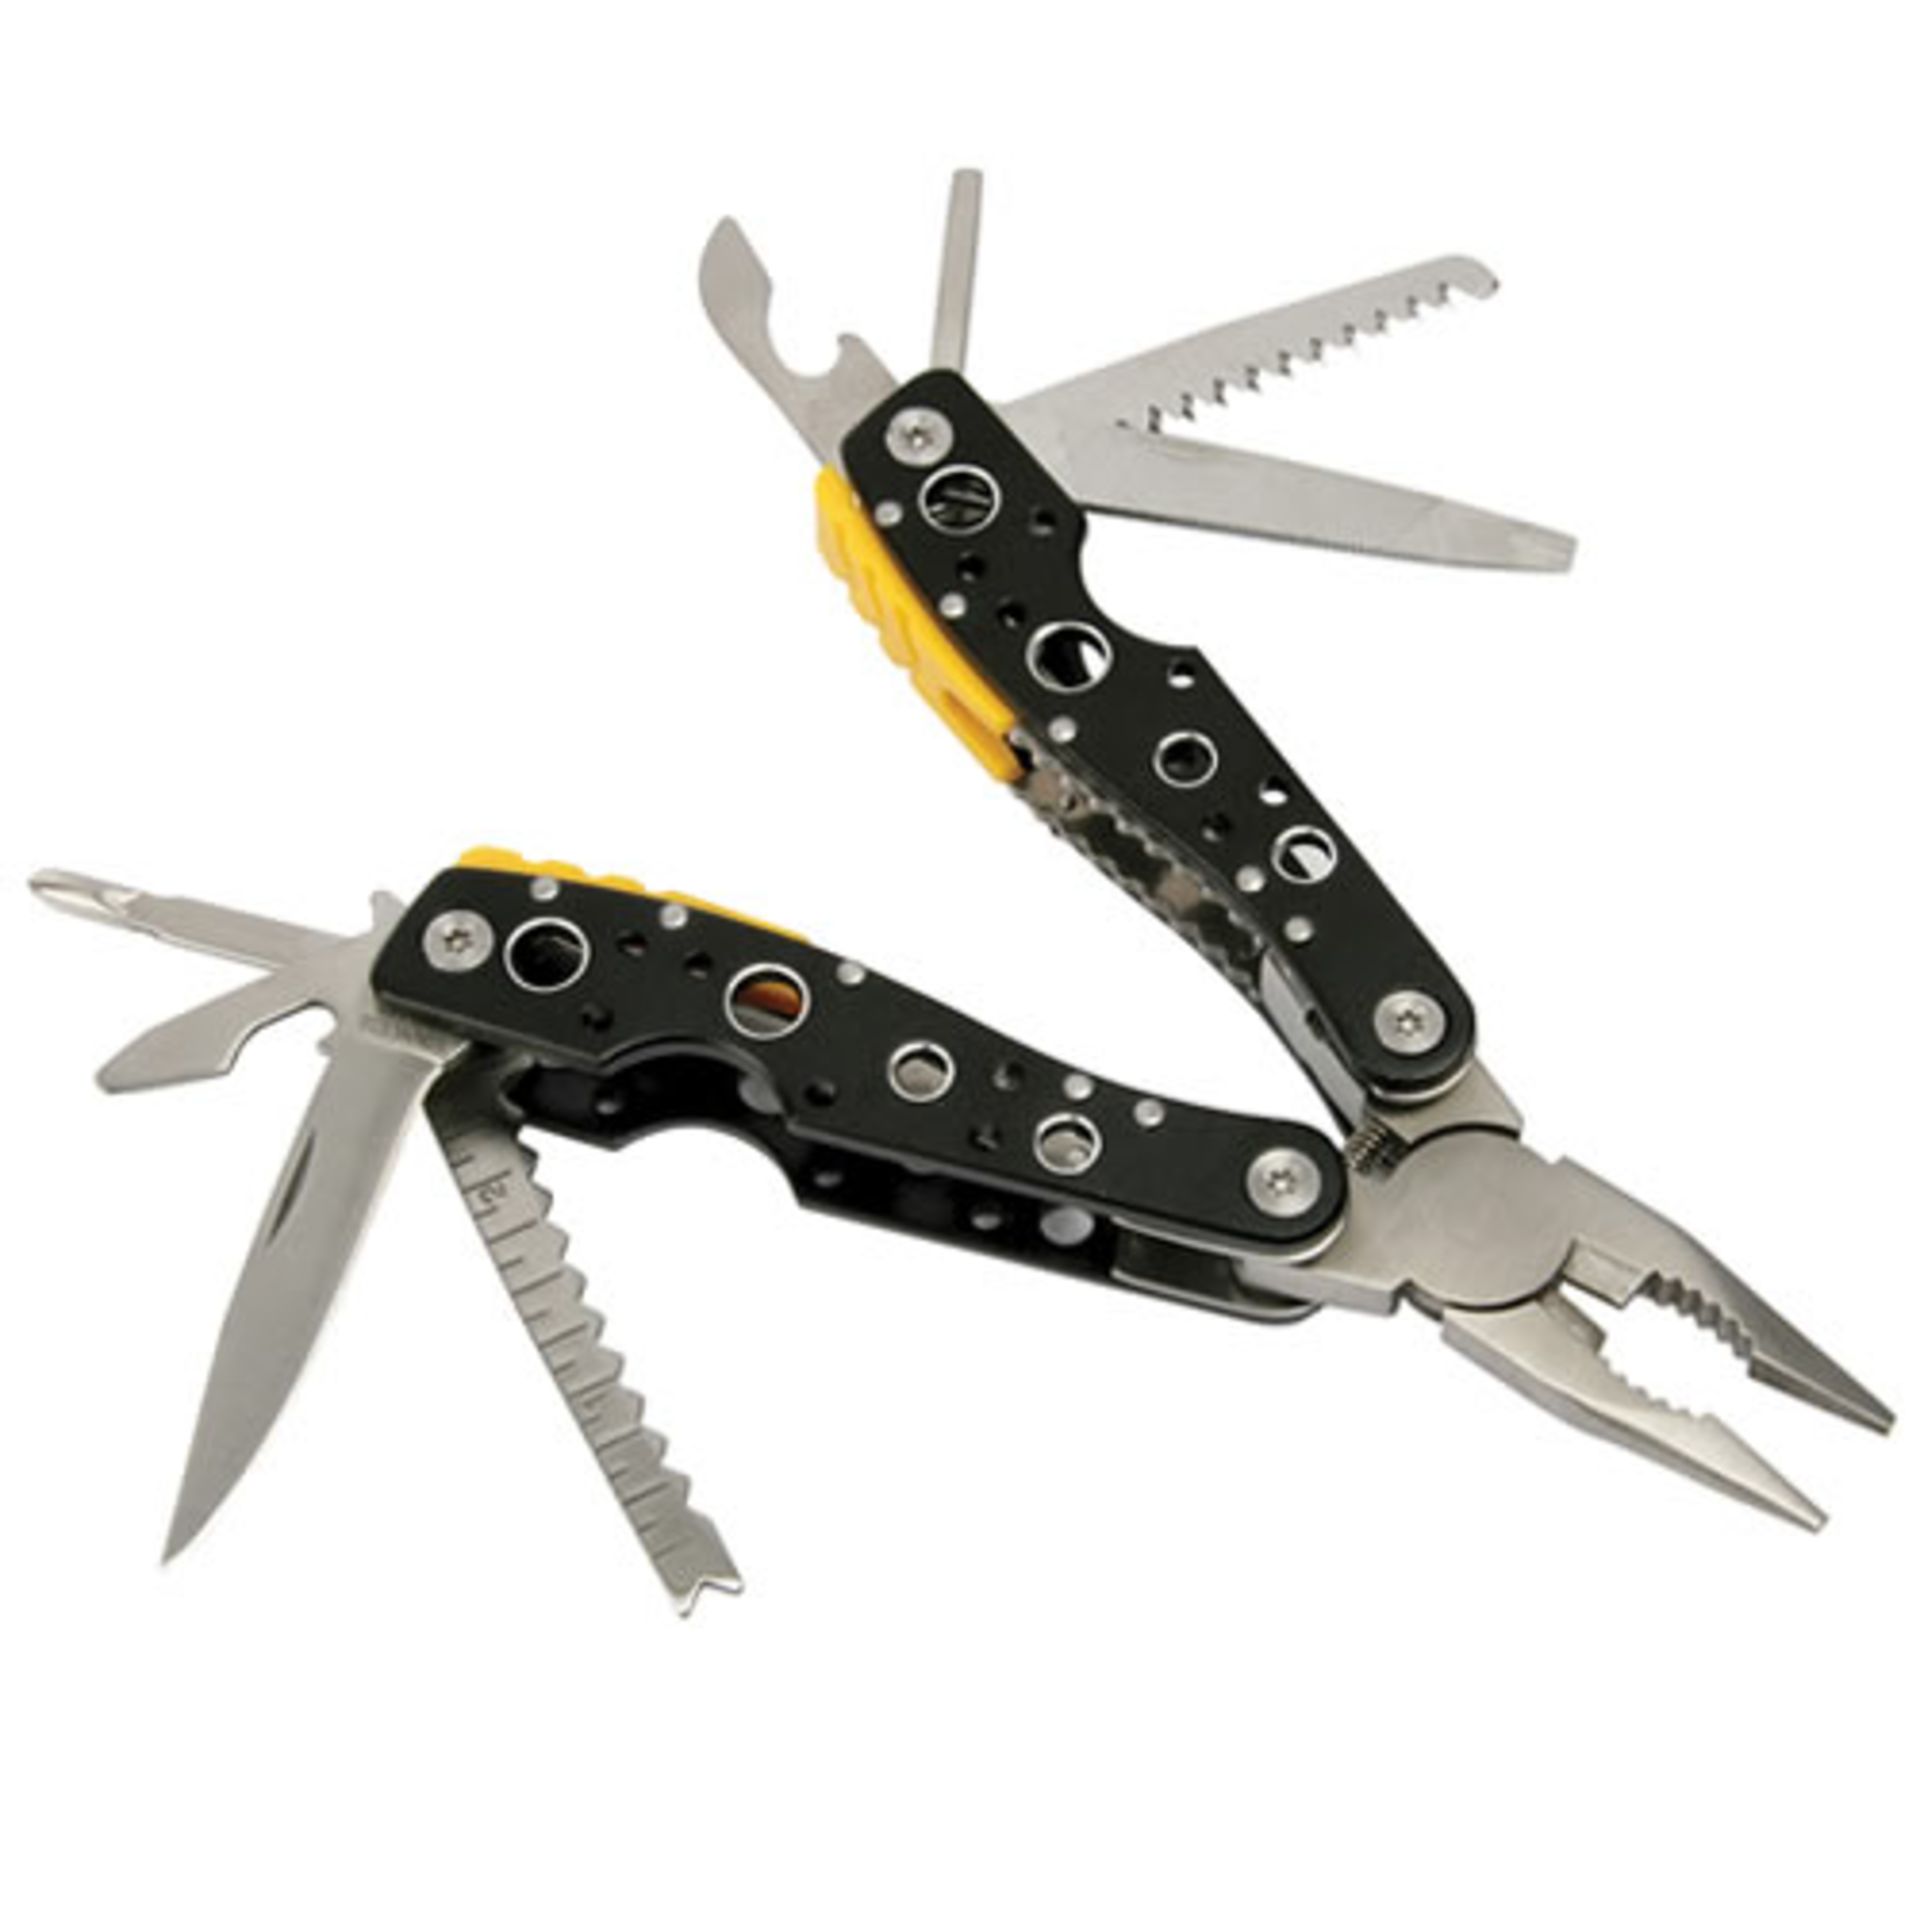 V 14 In 1 Multitool In Gift Box With Carry Pouch Aluminium Handles With Saw/Knife/Hook/Can Opener